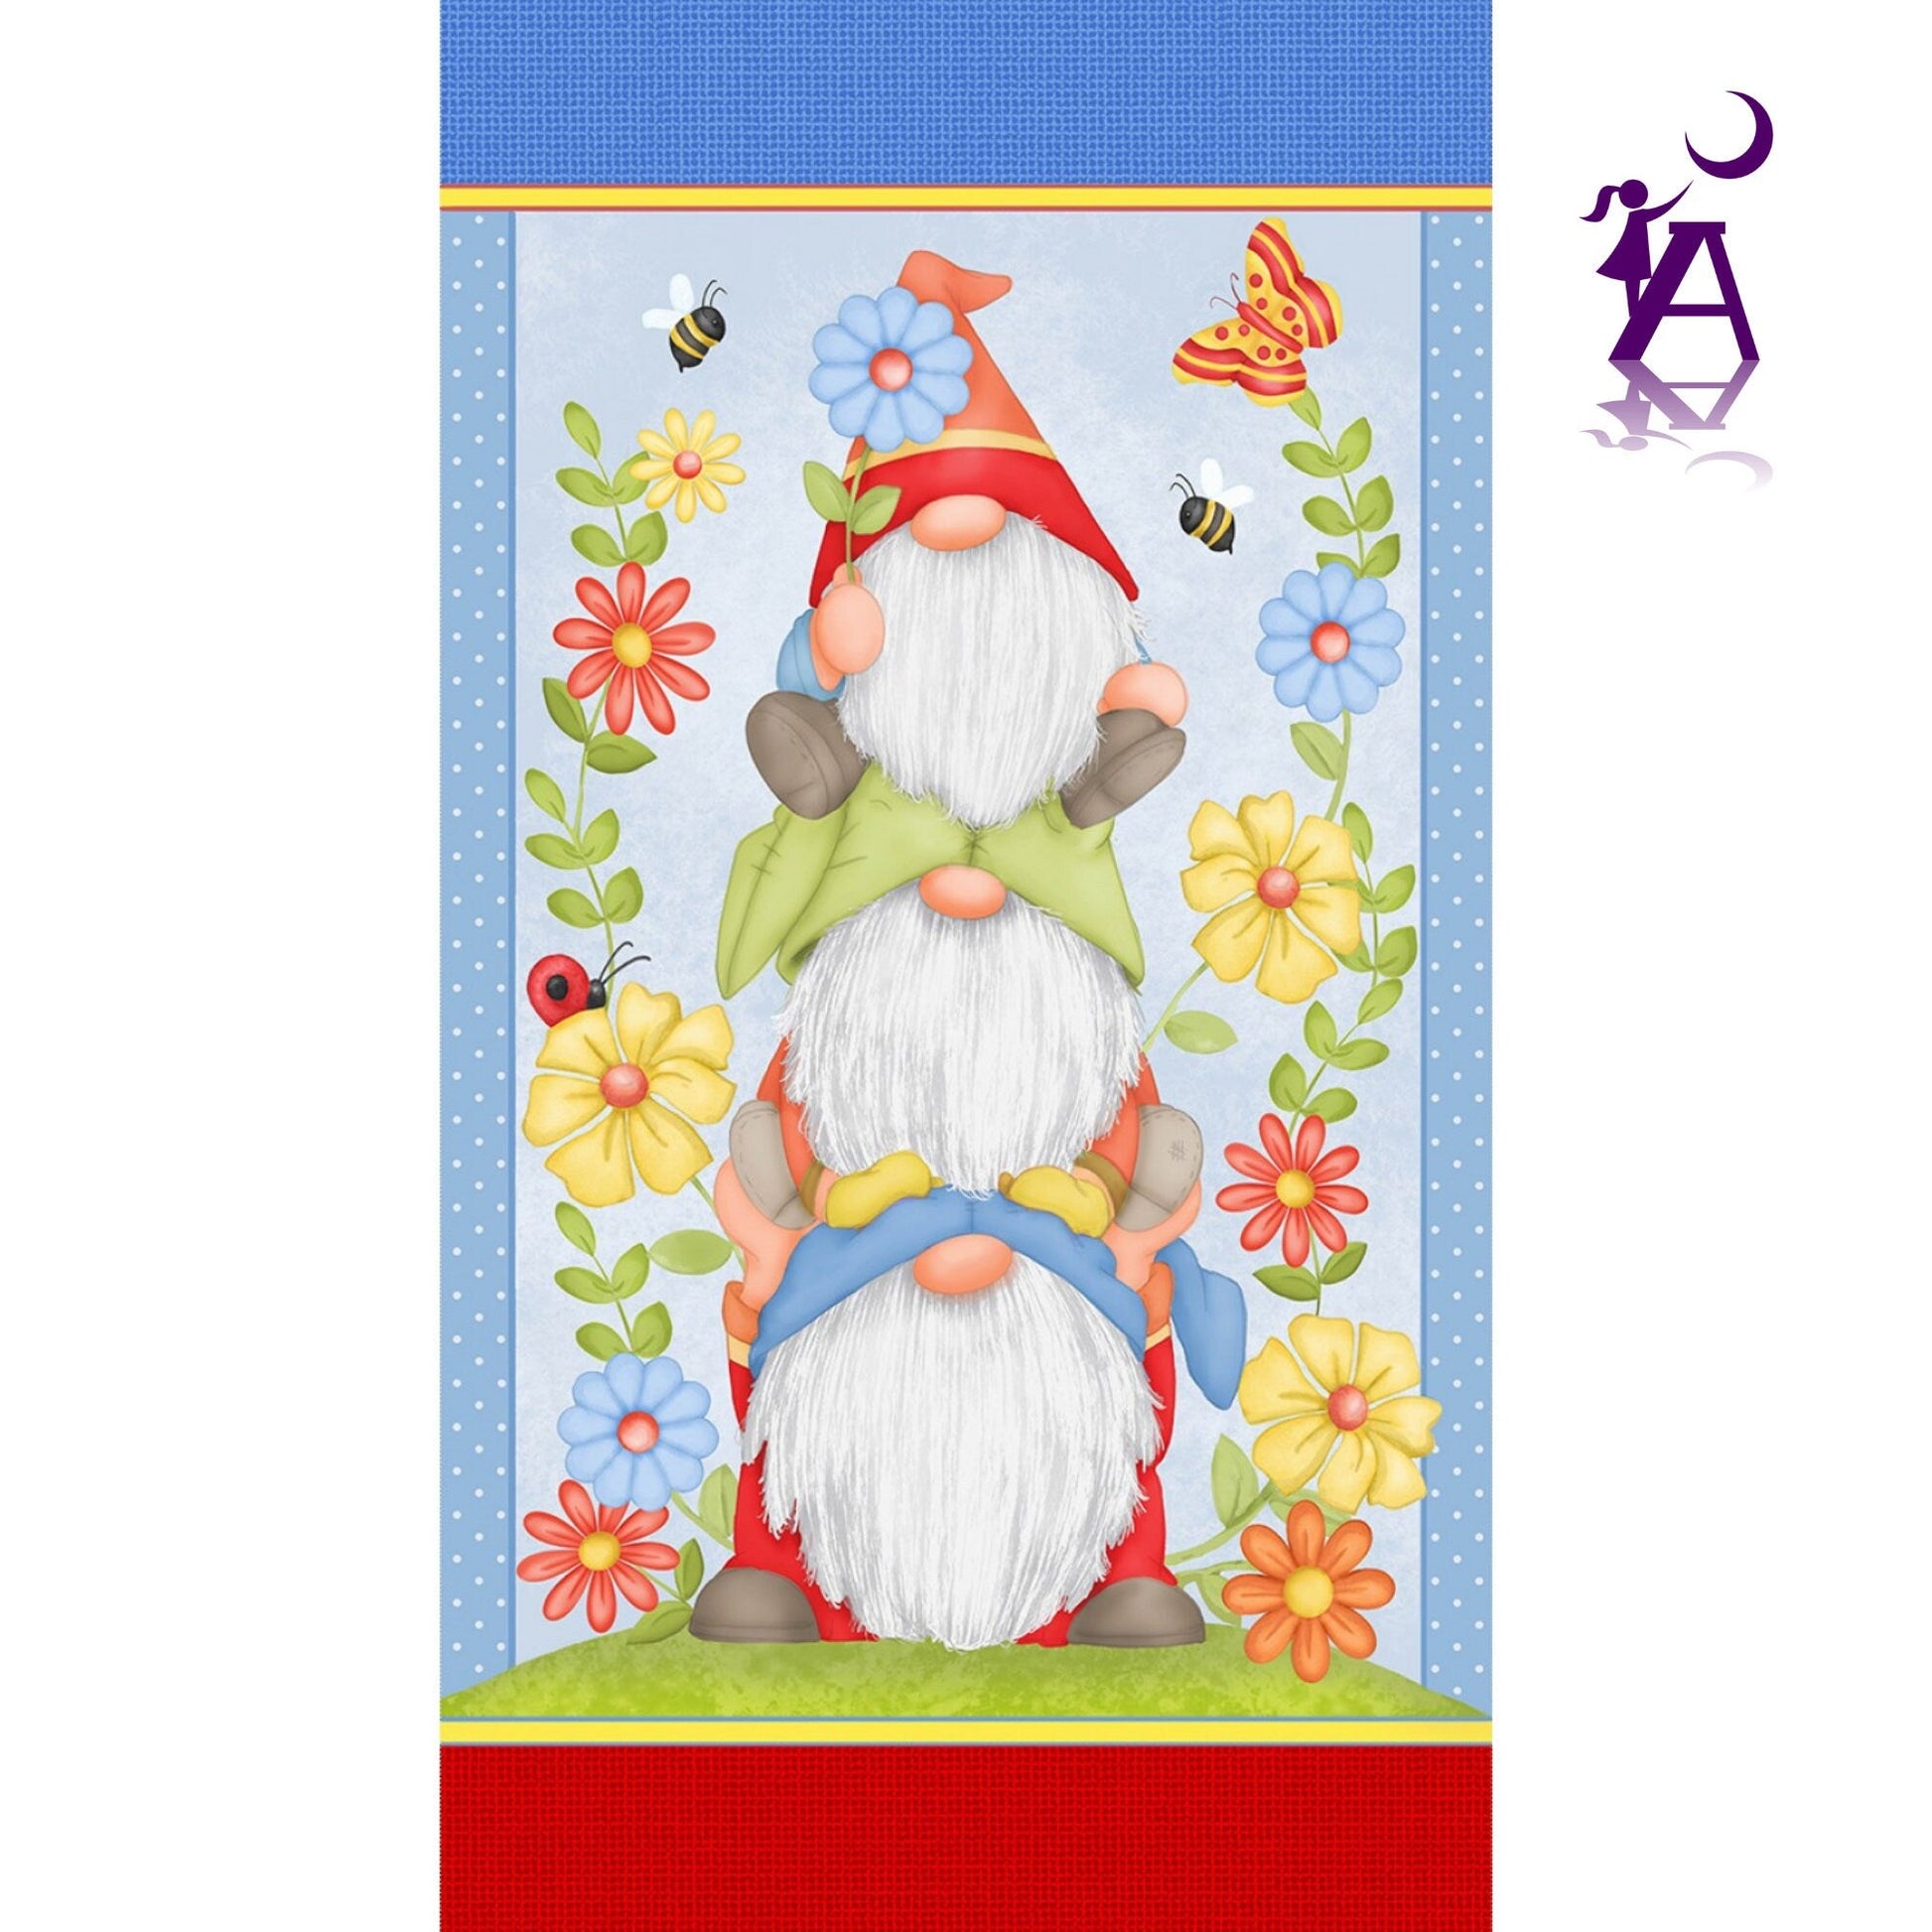 Wilmington Prints Gnome Panel Gnome is Where Your Garden Grows, Peeking Gnomes on Red by the yard, Garden Gnome Cotton, Henry Glass, Gnome Cotton Fabric by the yard